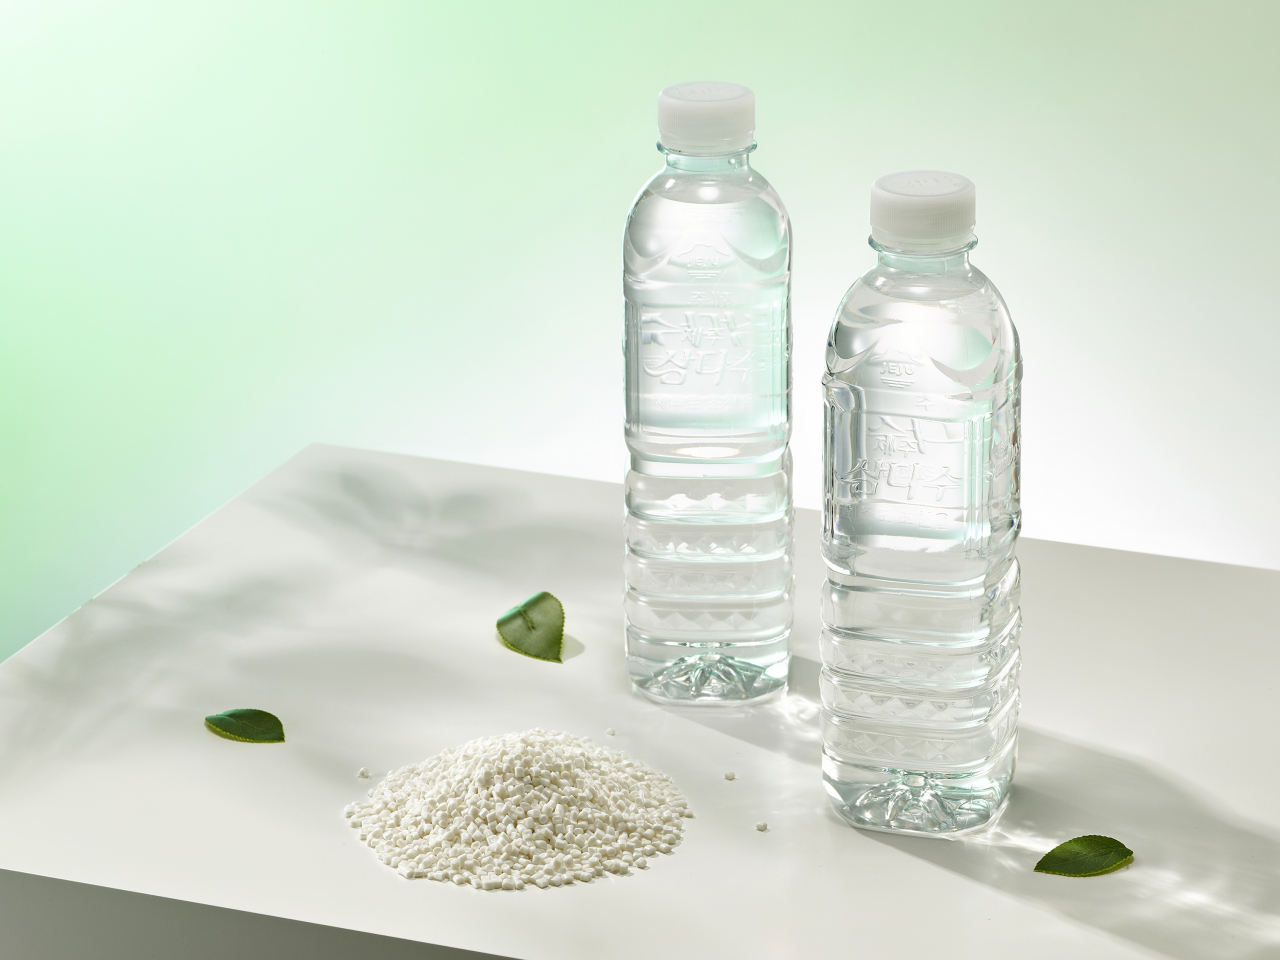 SK Chemicals‘ plastic bottles made of chemically-recycled PET materials. (SK Chemicals)